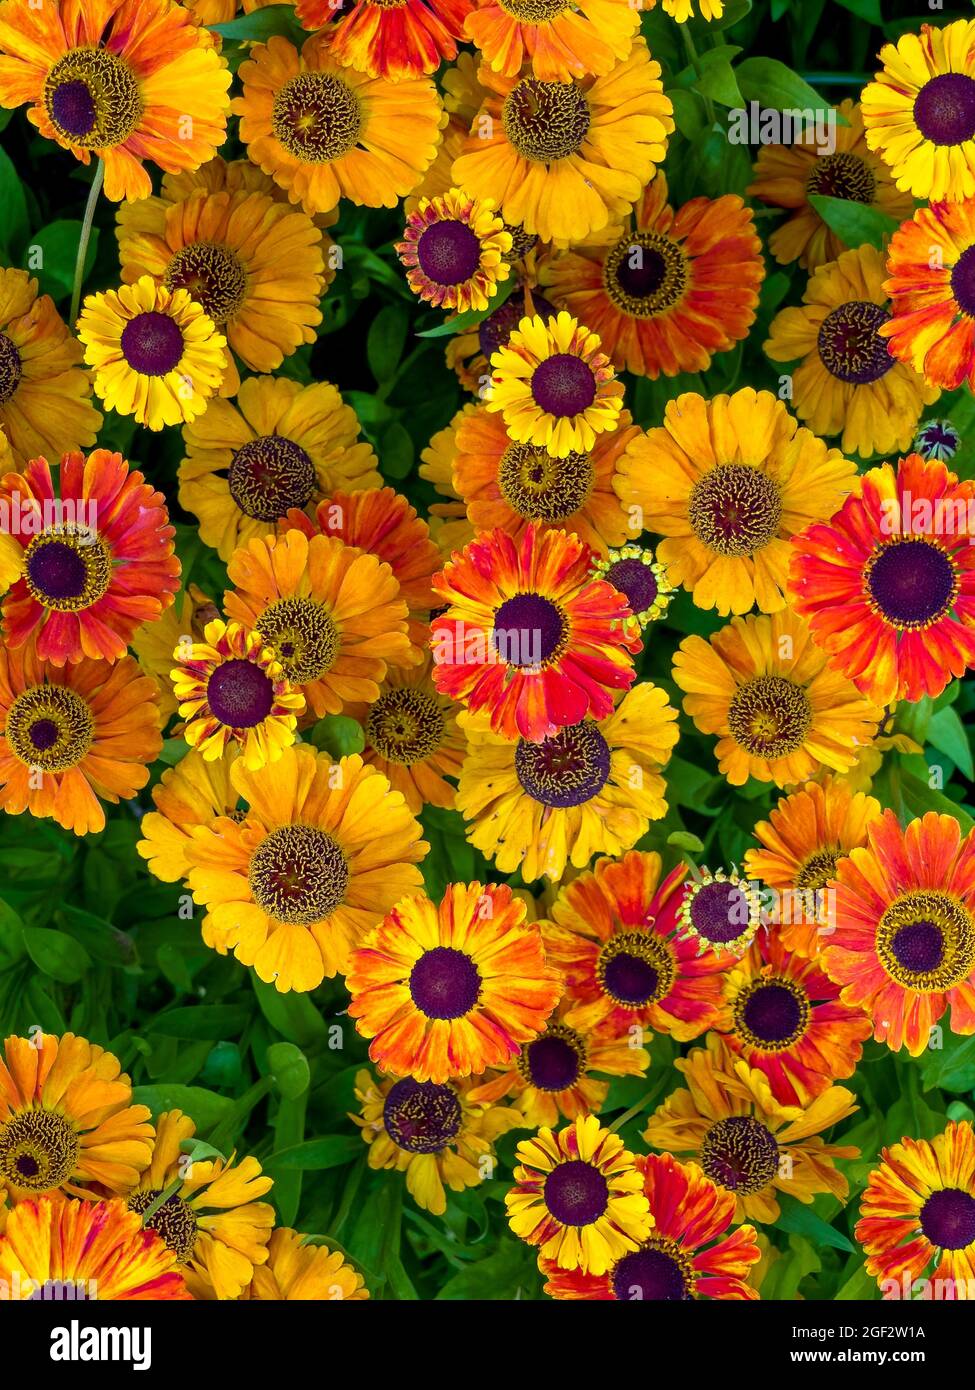 Plan view picture of yellow and orange Helenium flowers Stock Photo